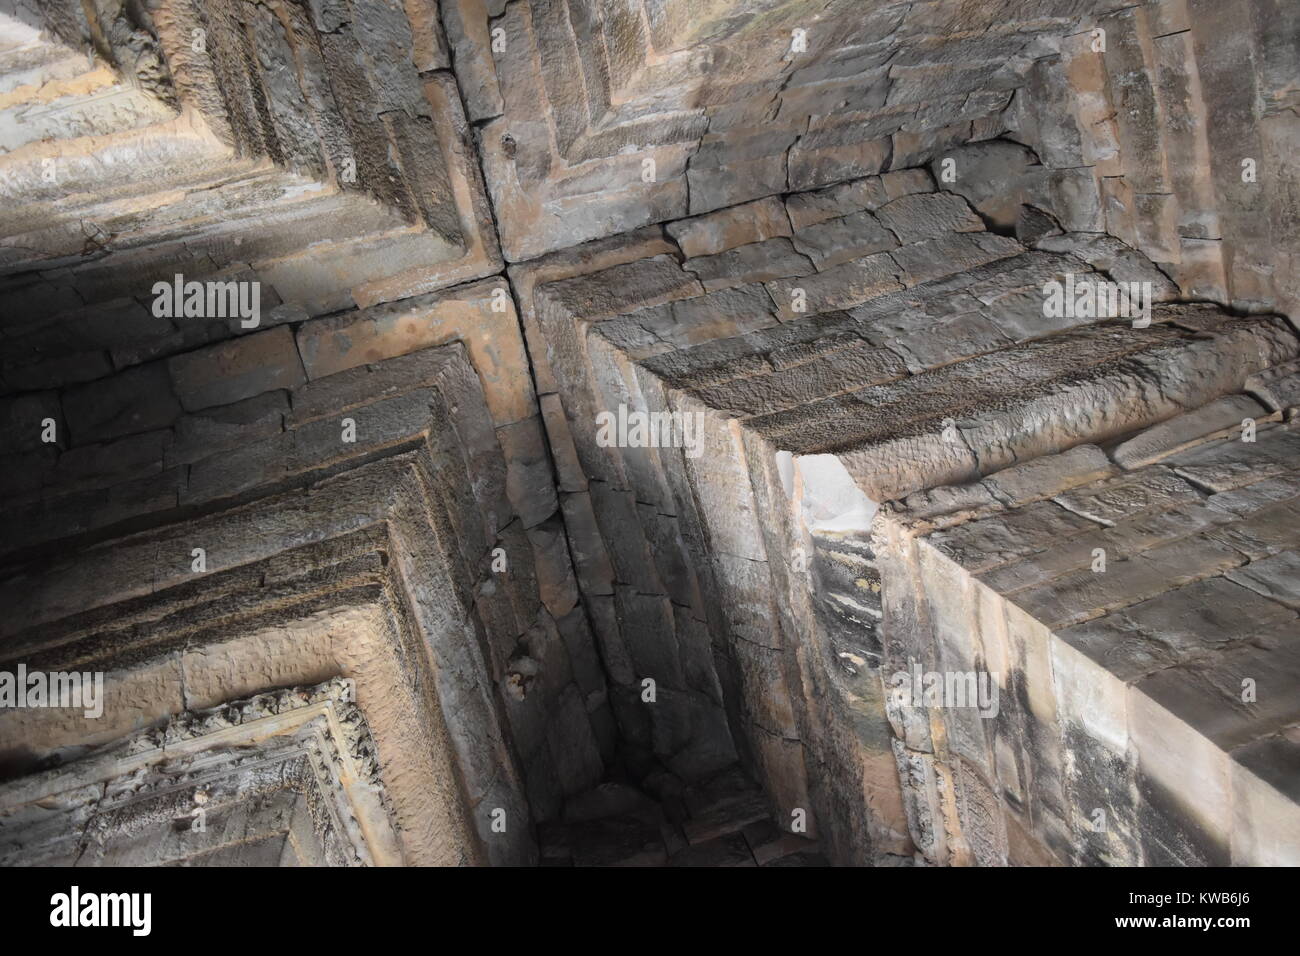 Cross shape ceiling formed by arch columns inside the ancient Angkor Wat stone temple in Cambodia Stock Photo